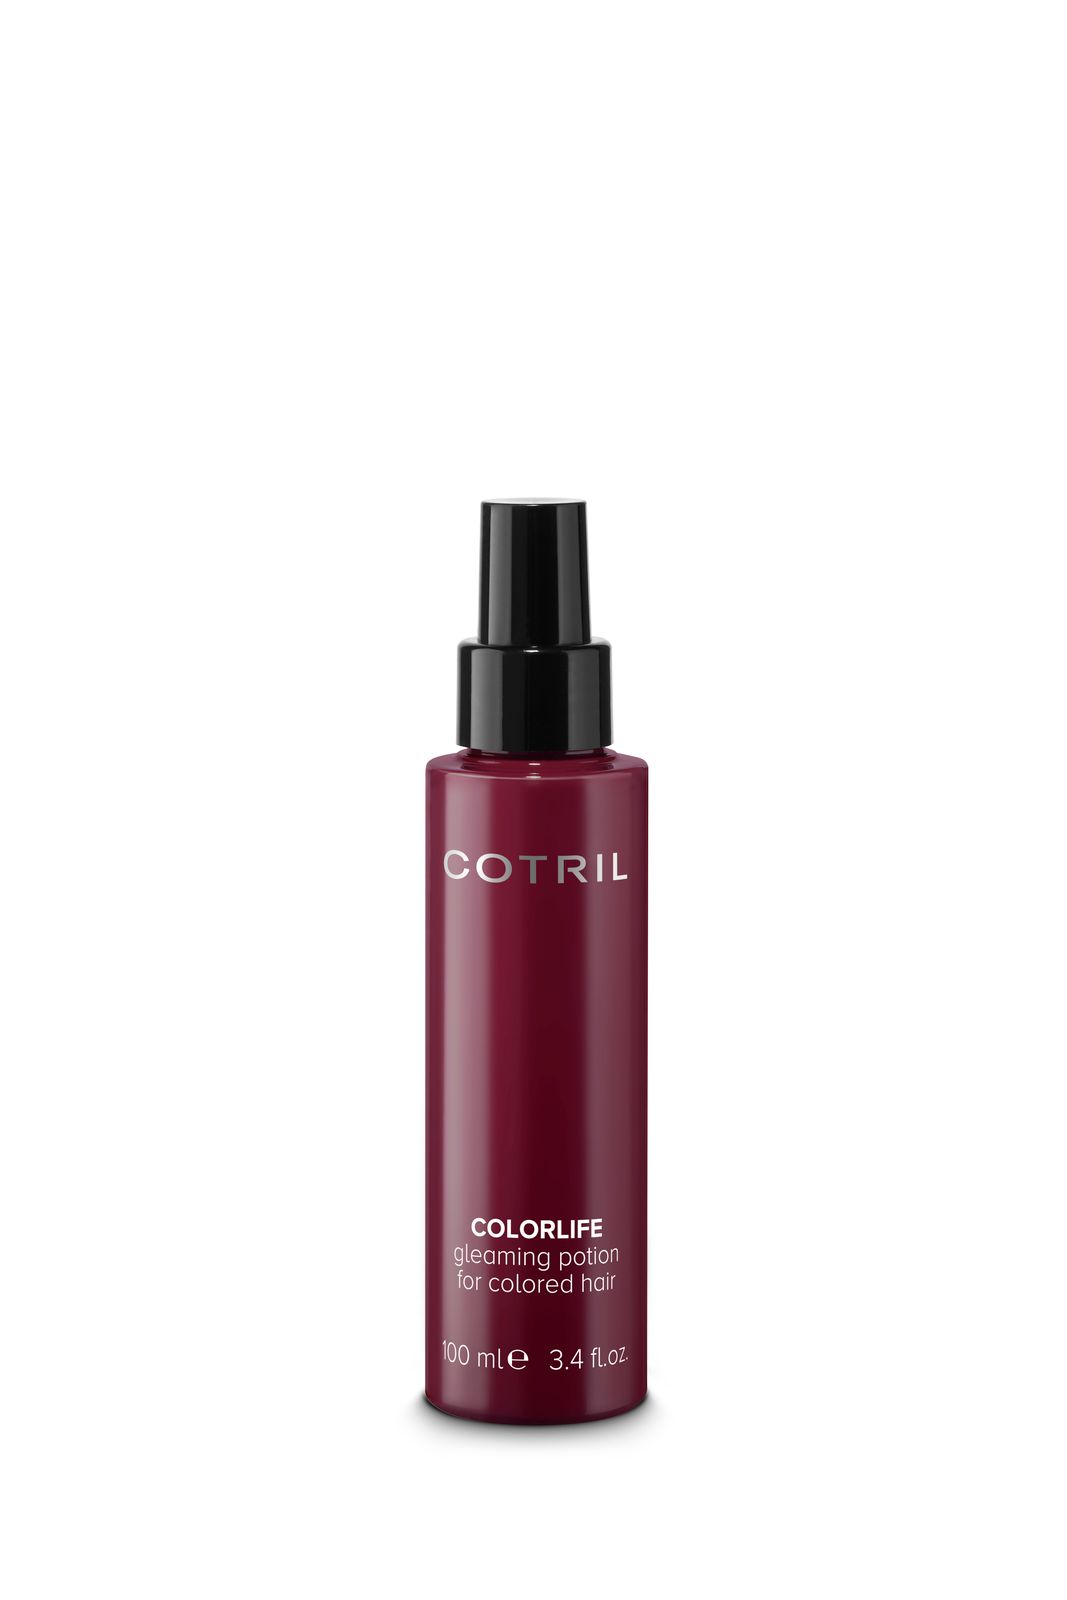 Cotril Color Life Gleaming Potion for Colored Hair 100ml